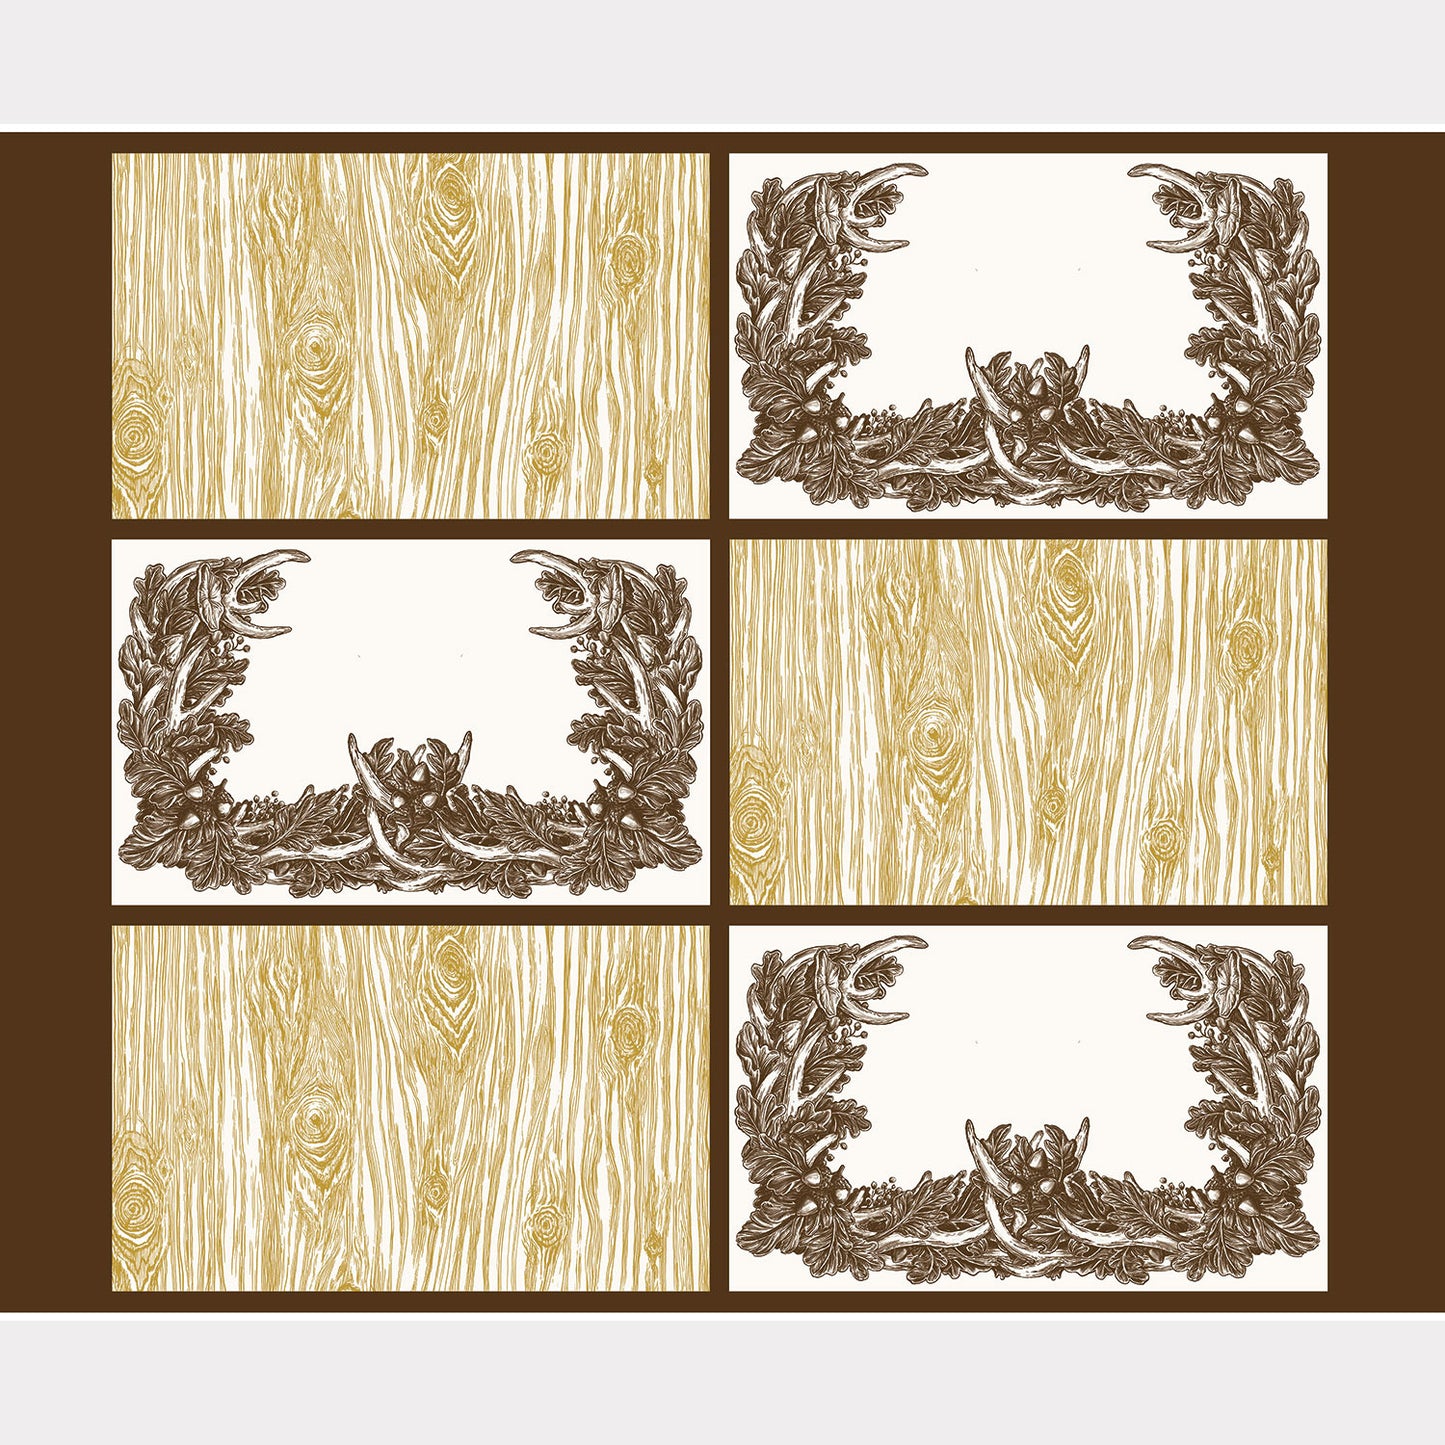 Monthly Placemat Panels - September Autumn Rustic Brown Placemat Panel Primary Image